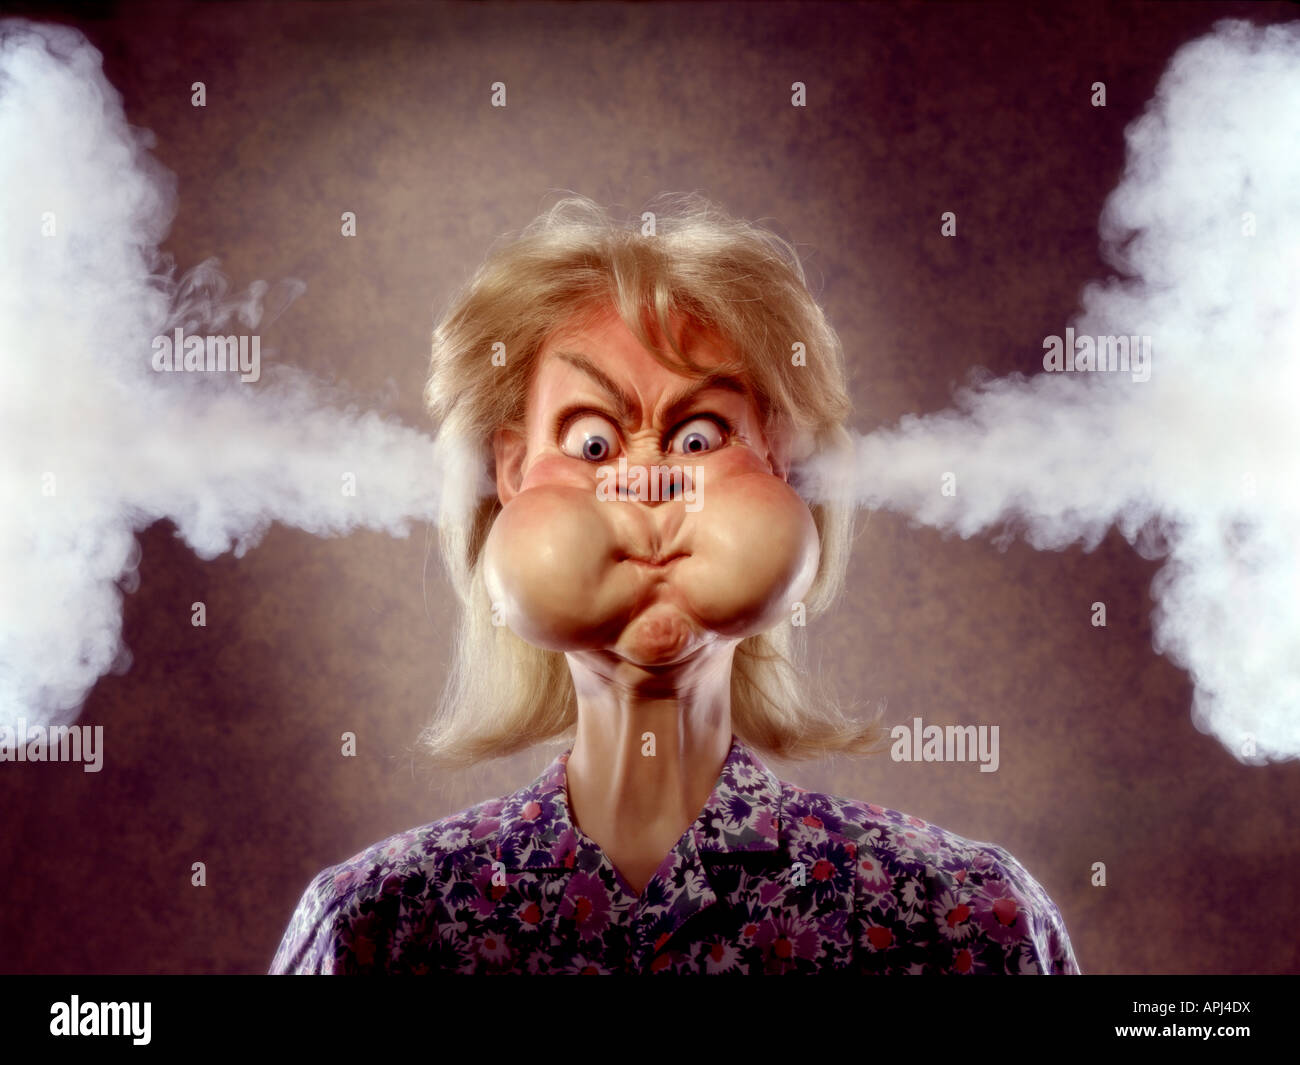 frustrated-character-lady-with-steam-coming-from-ears-APJ4DX.jpg